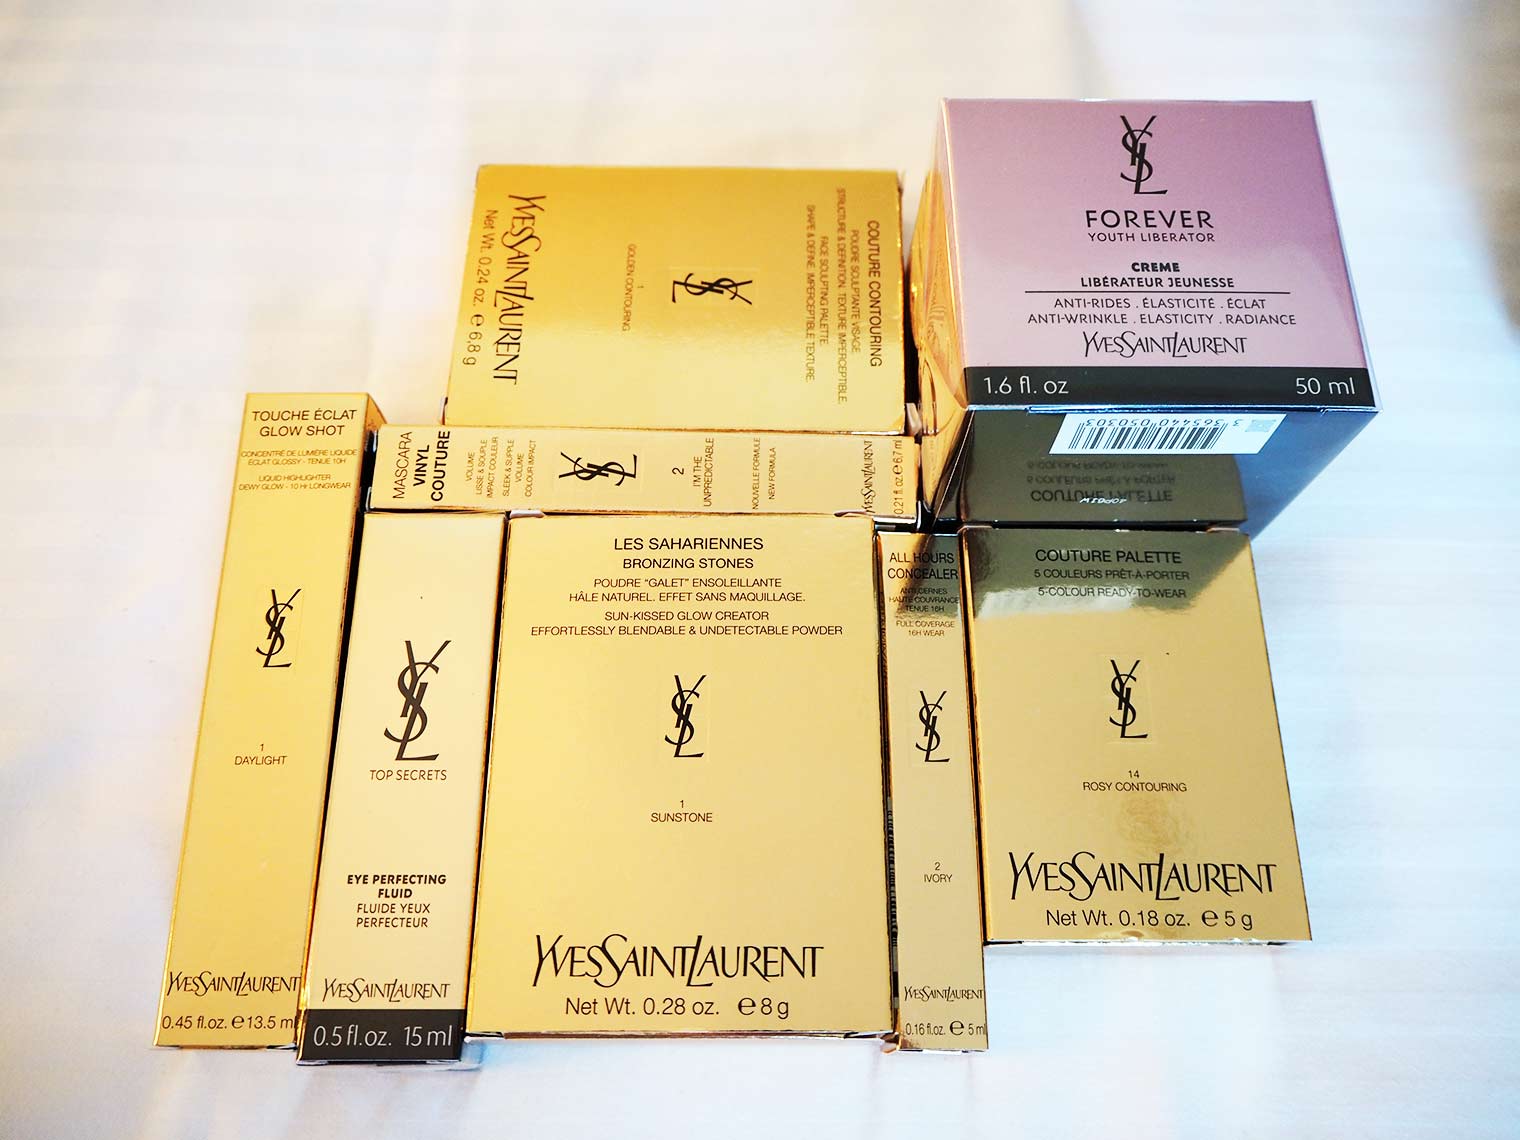 YSL beauty products